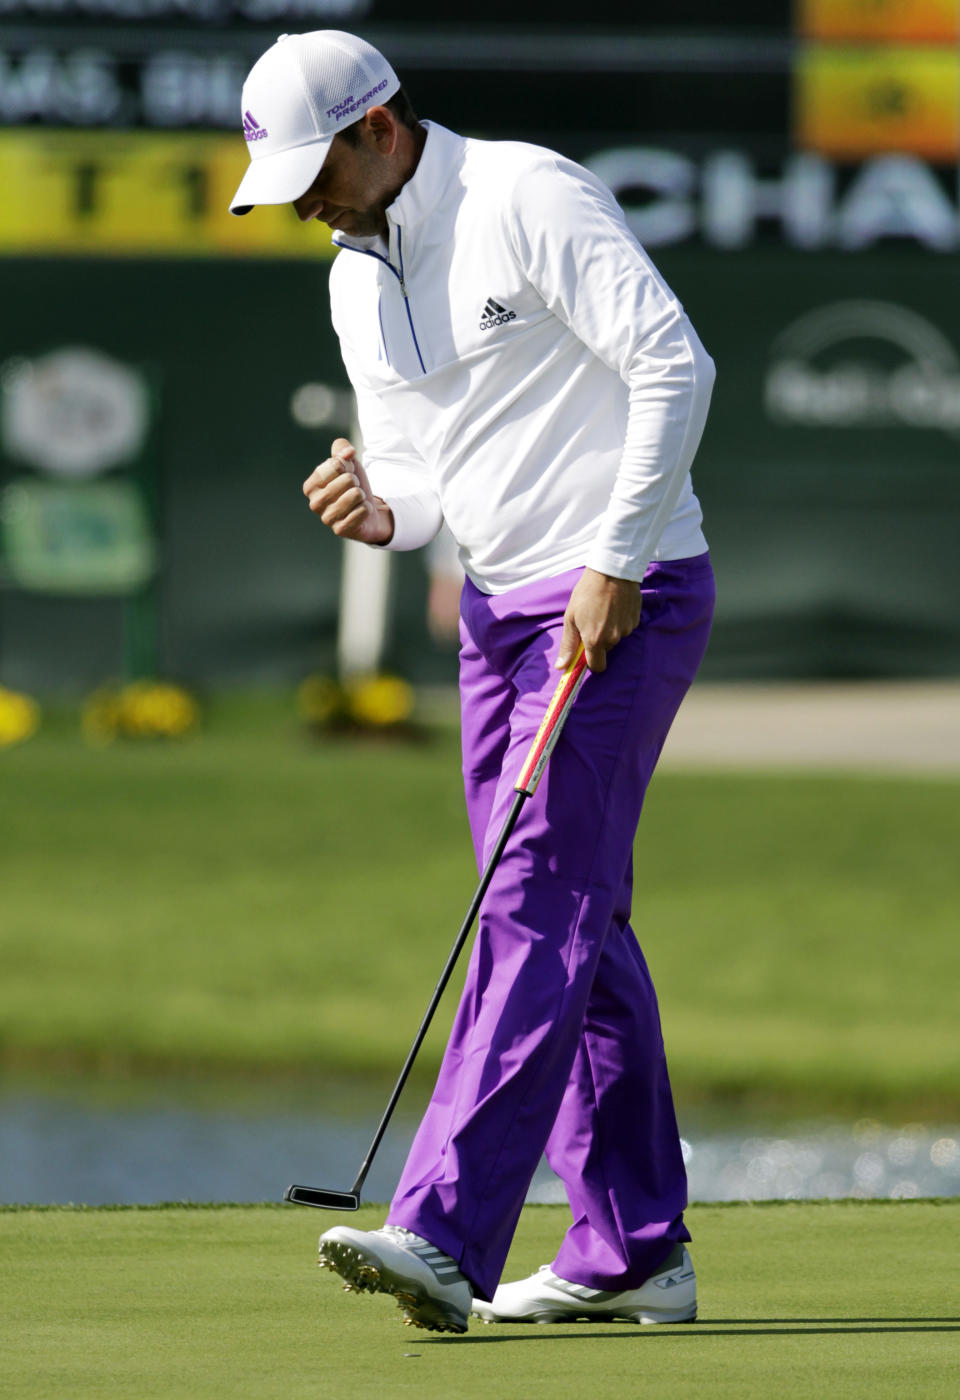 Sergio Garcia reacts after making par on the 18th hole during the second round of the Houston Open golf tournament, Friday, April 4, 2014, in Humble, Texas. (AP Photo/Patric Schneider)